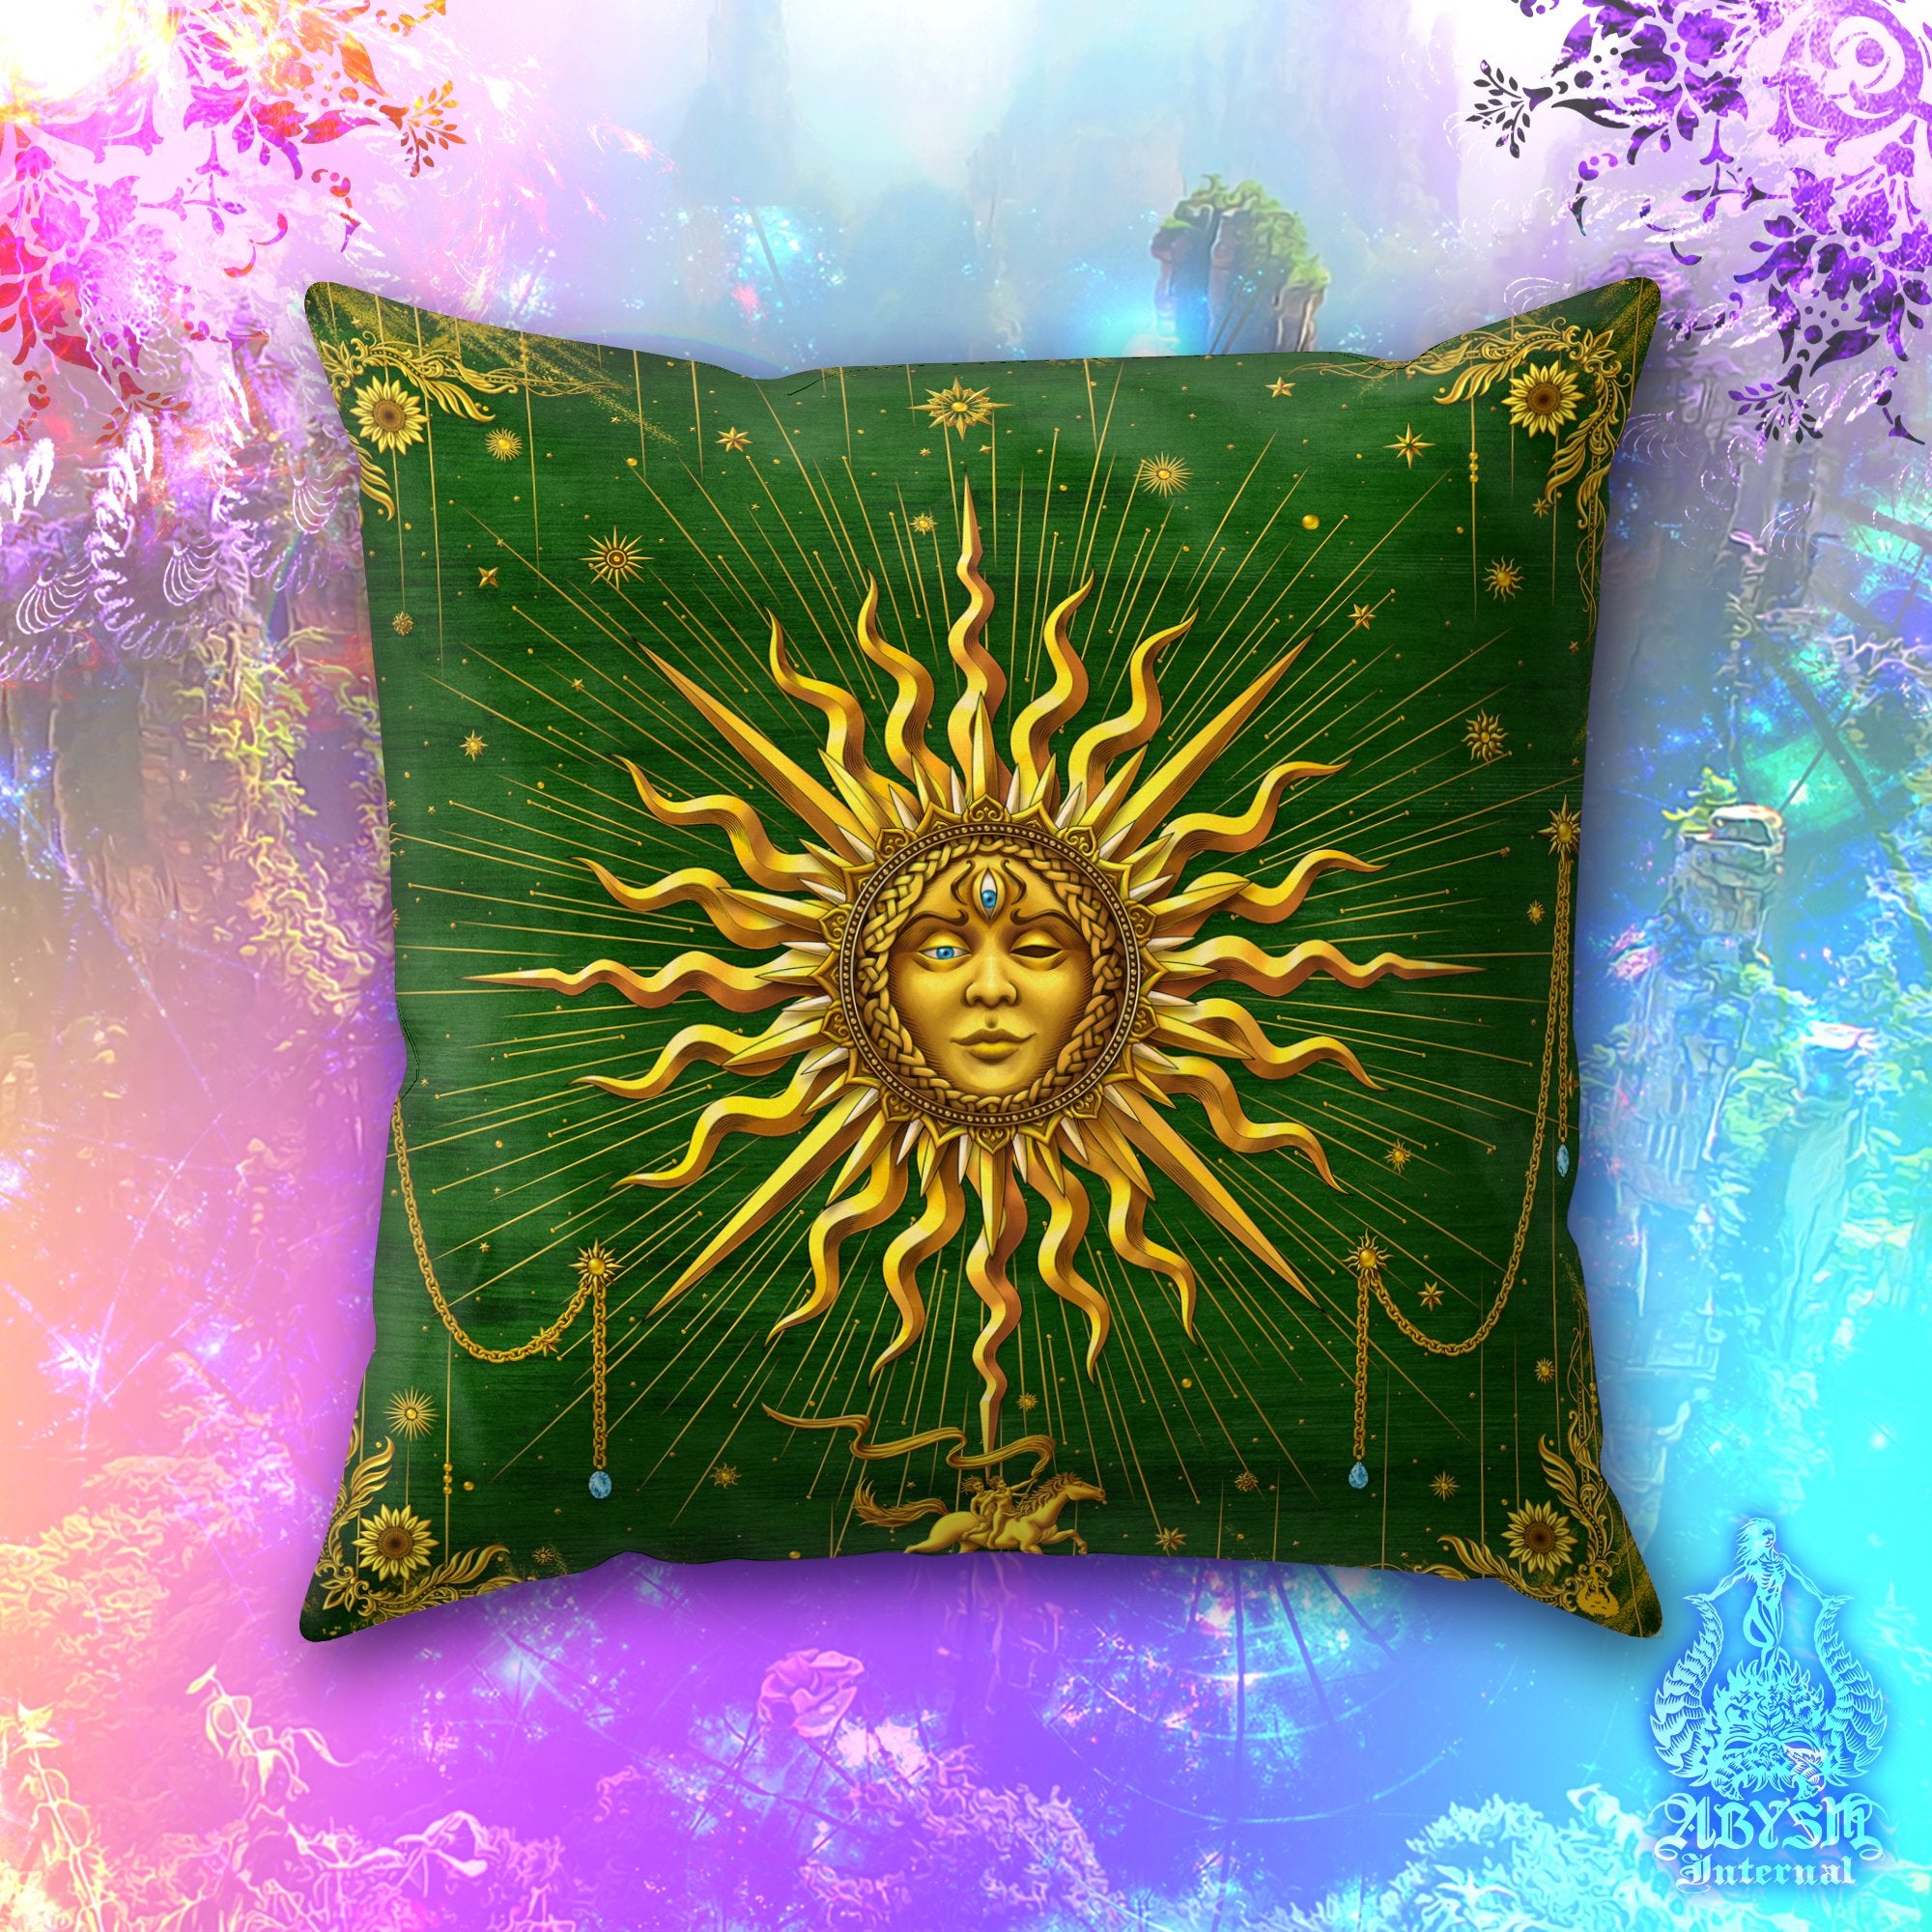 Gold Sun Throw Pillow, Boho Decorative Accent Pillow, Square Cushion Cover, Arcana Tarot Art, Indie Home, Magic & Fortune Room Decor - 7 Colors - Abysm Internal